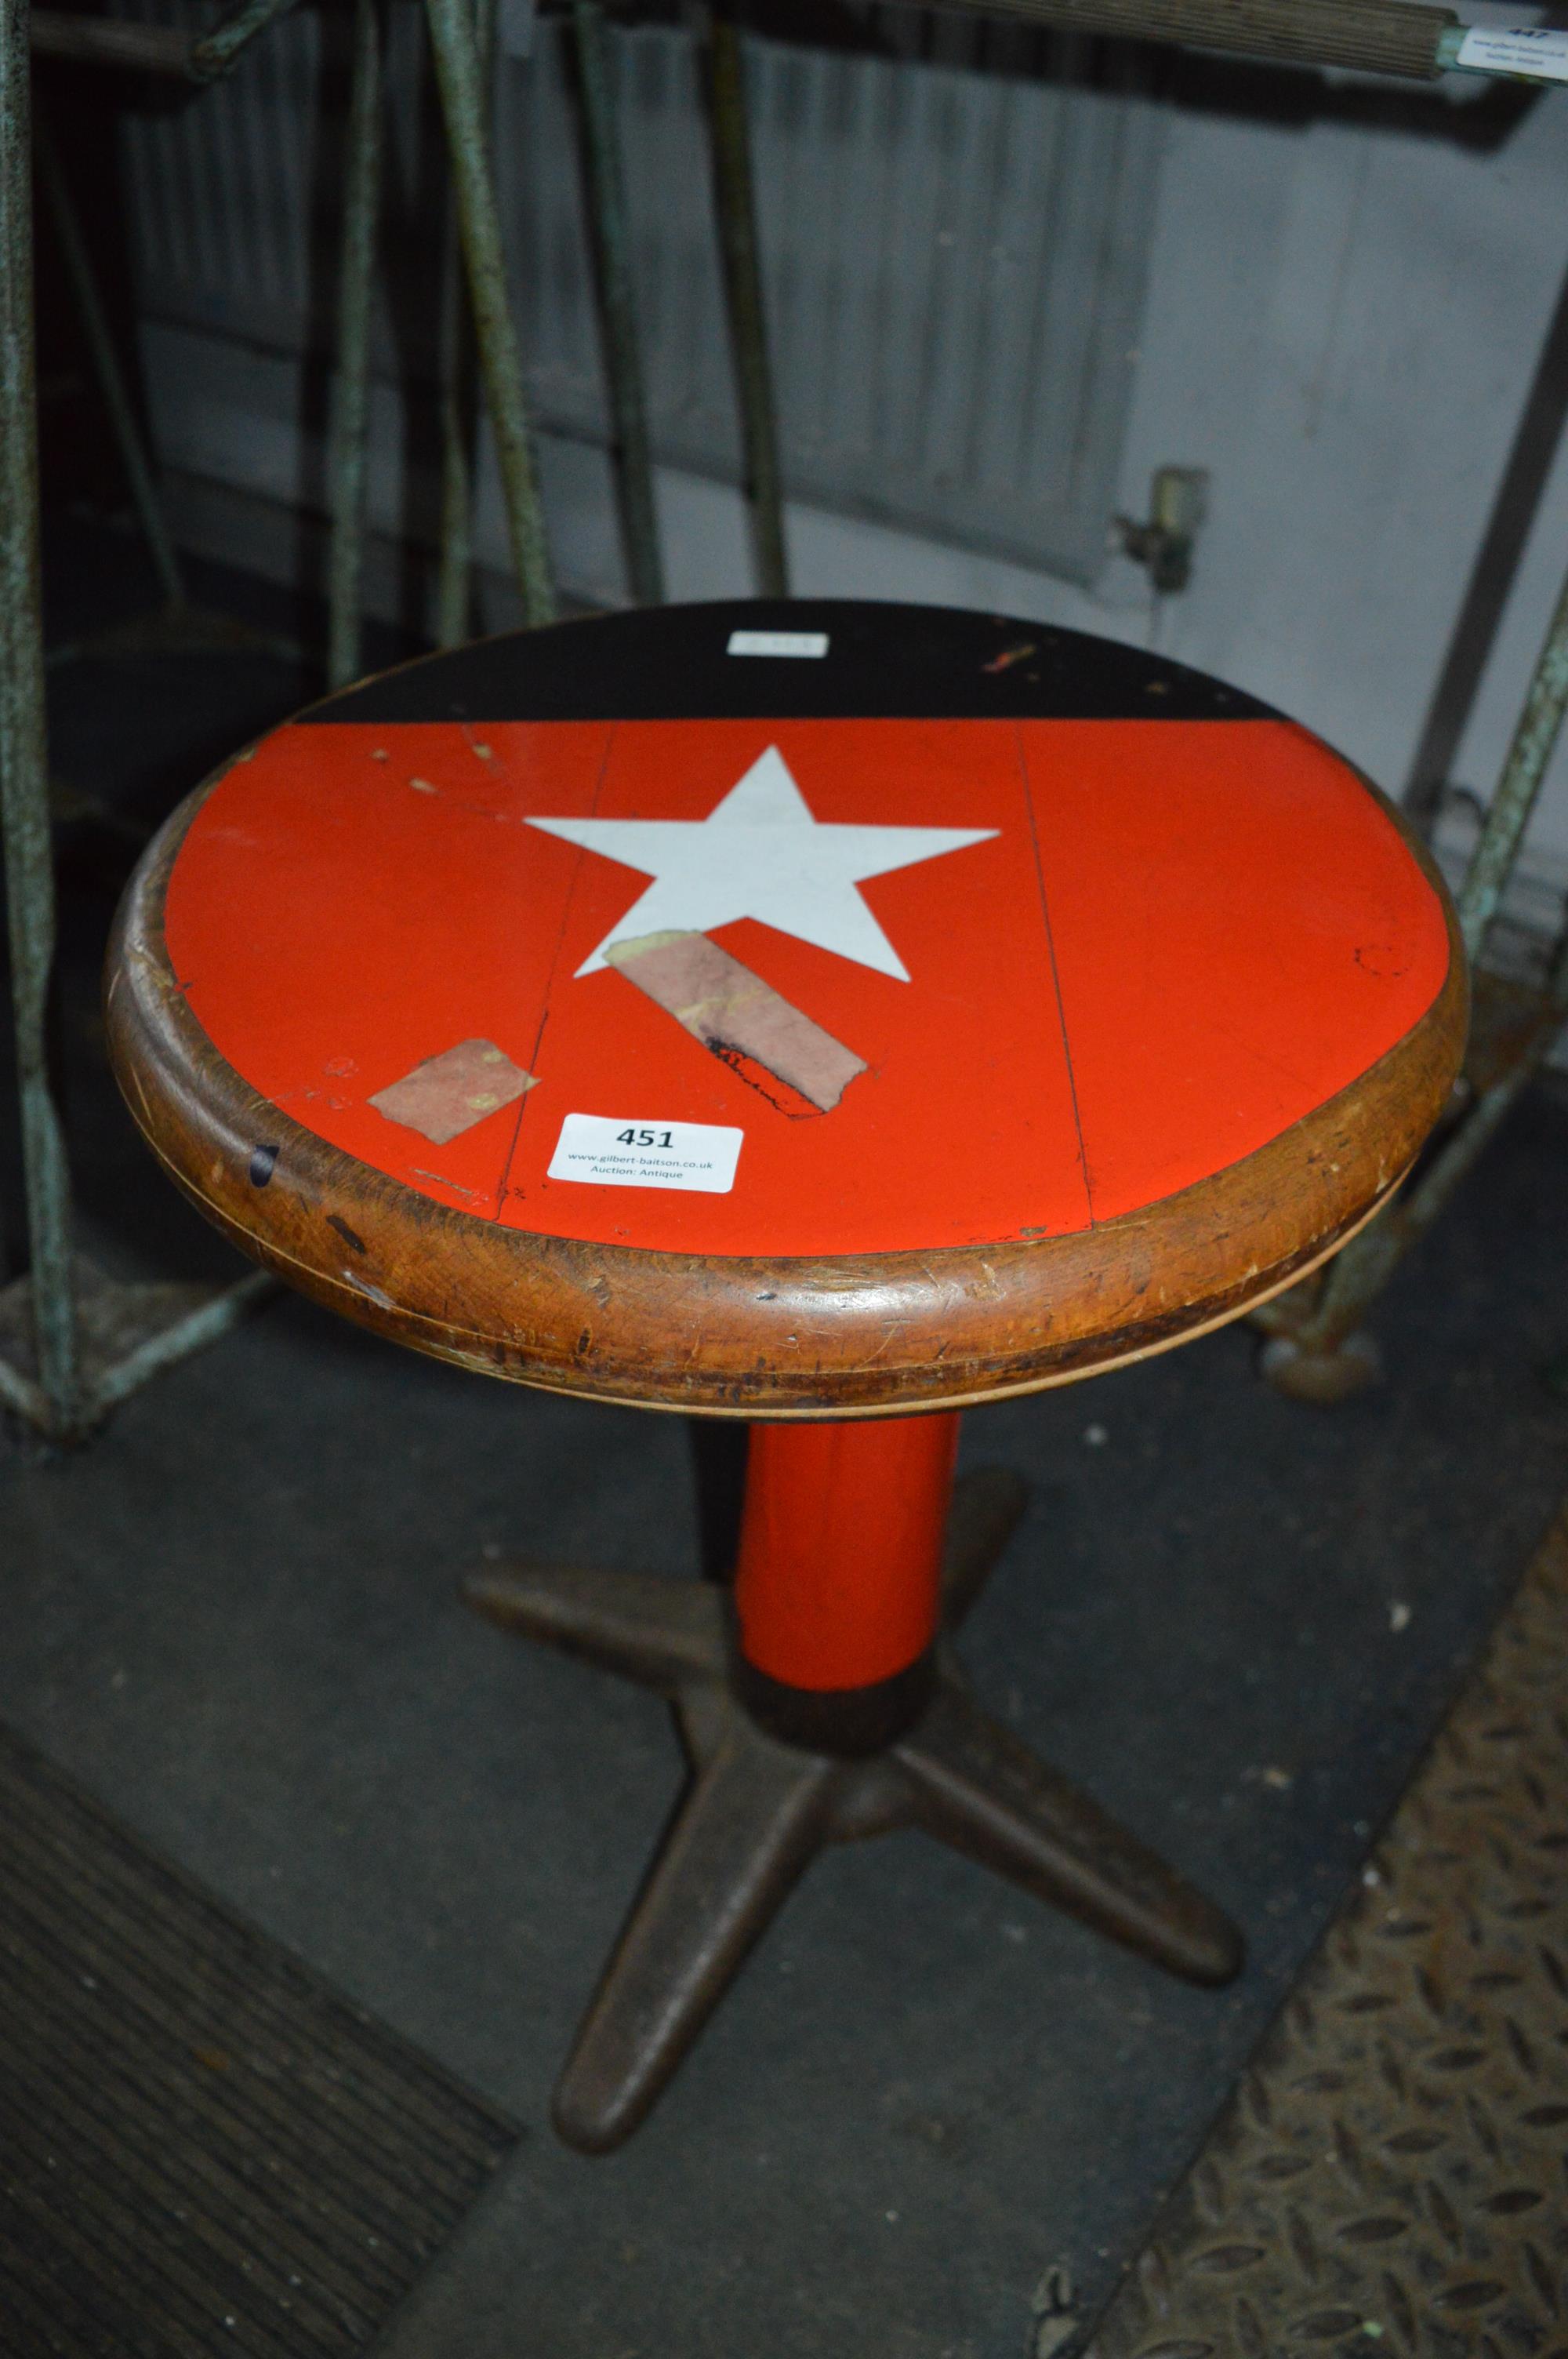 Singer Adjustable Sewing Stool with Painted Wooden Seat on Cast Iron Base